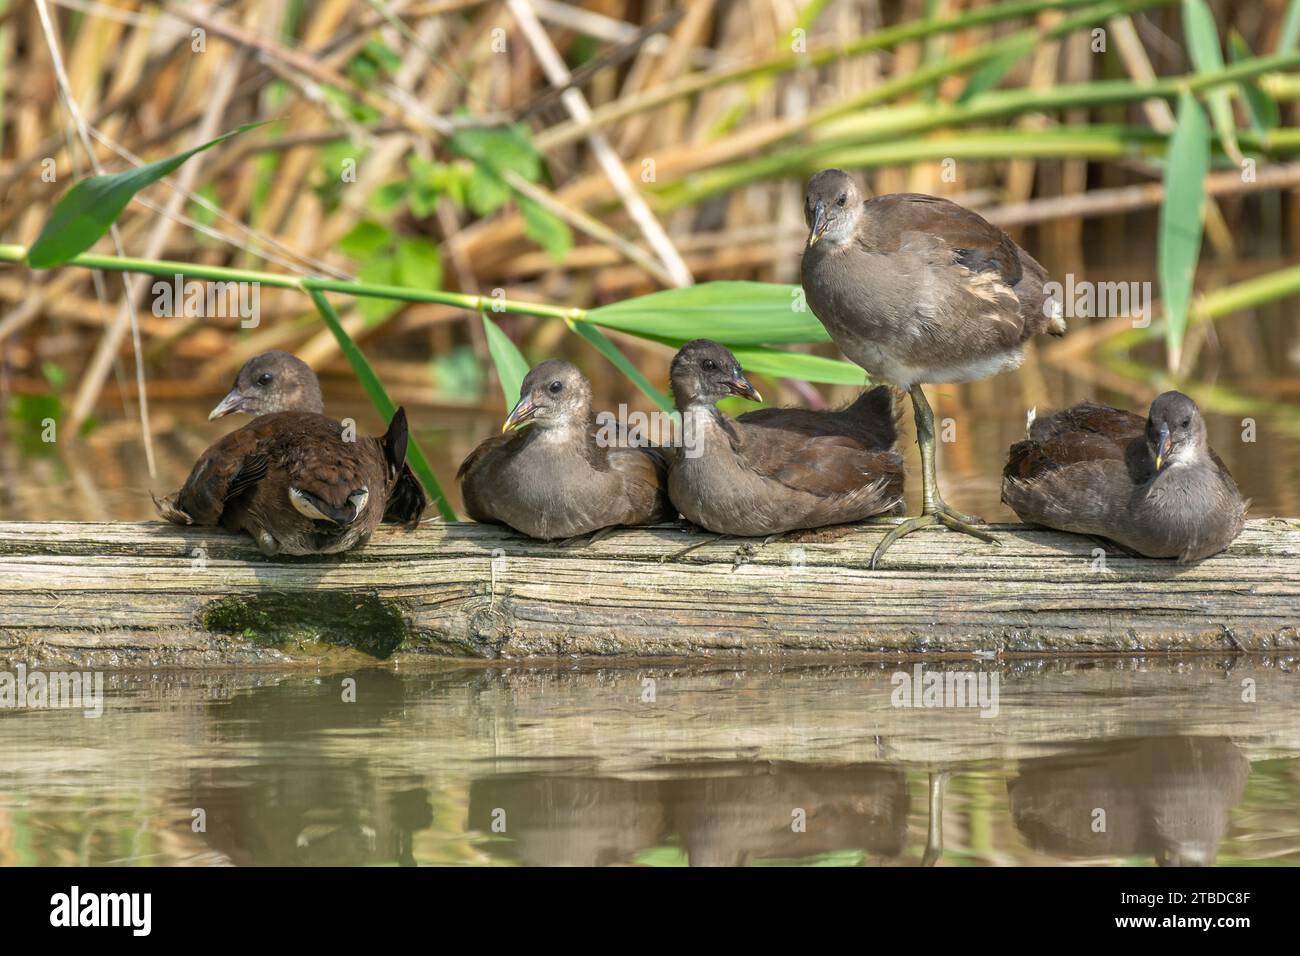 Family of five young common moorhen (Gallinula chloropus) resting together on a tree trunk in a river. Bas-Rhin, Alsace, Grand Est, France, Europe. Stock Photo